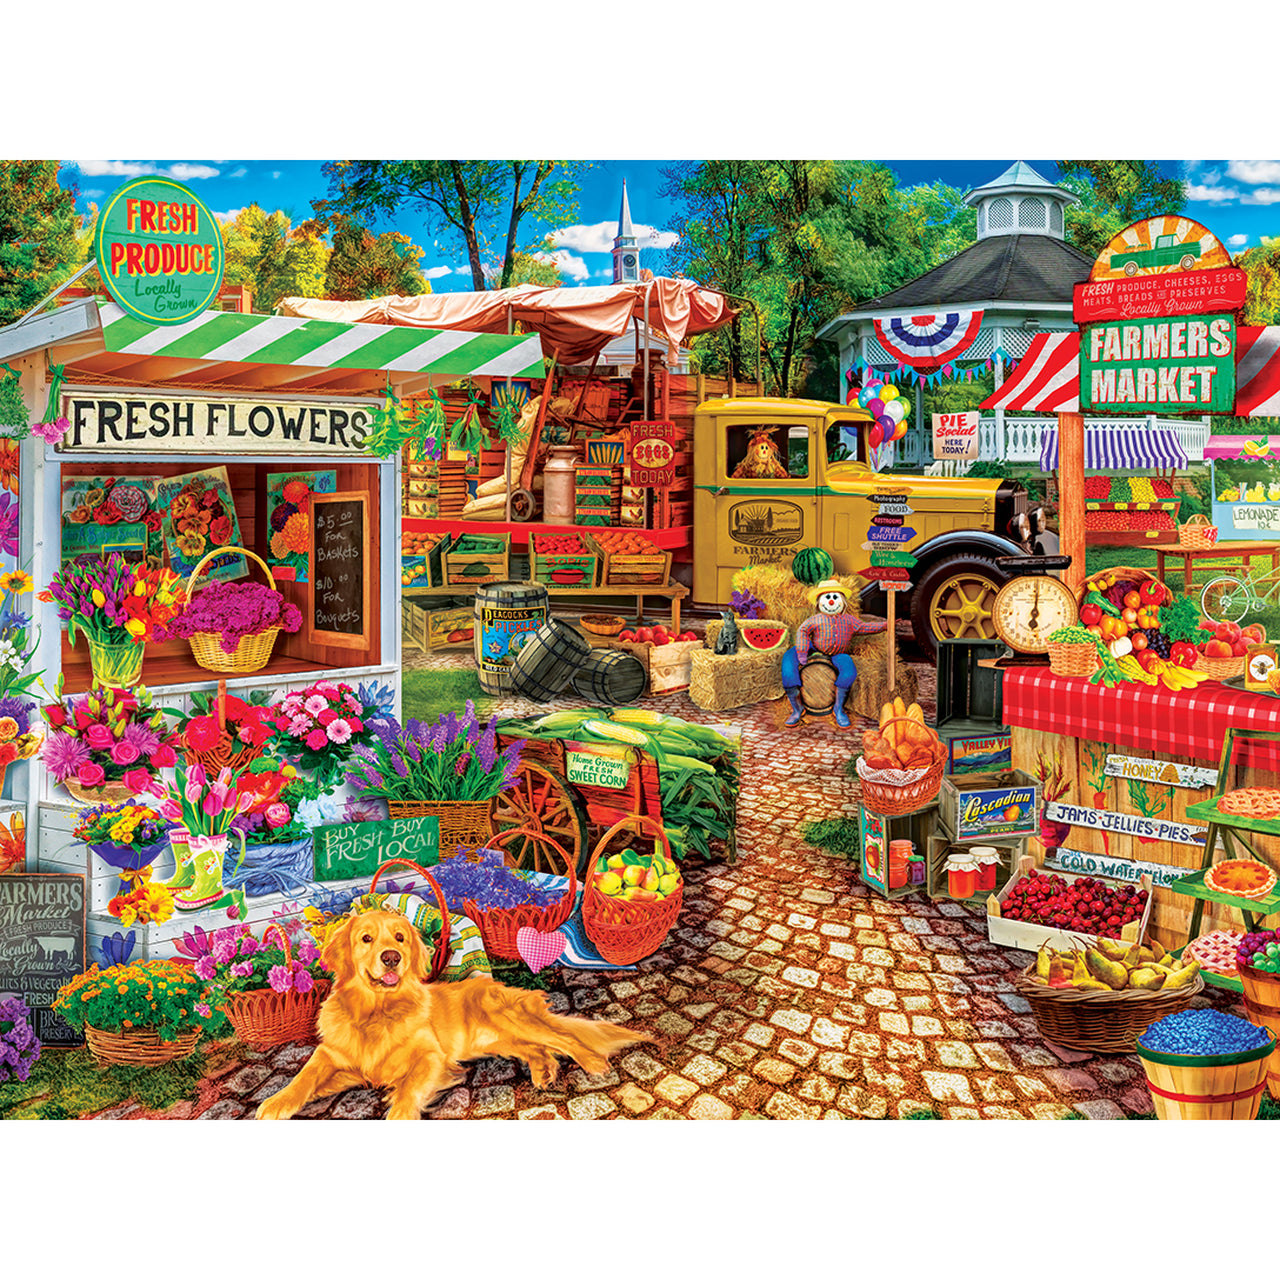 Farmer's Market - Sale on the Square - 750 Piece Jigsaw Puzzle by Masterpieces